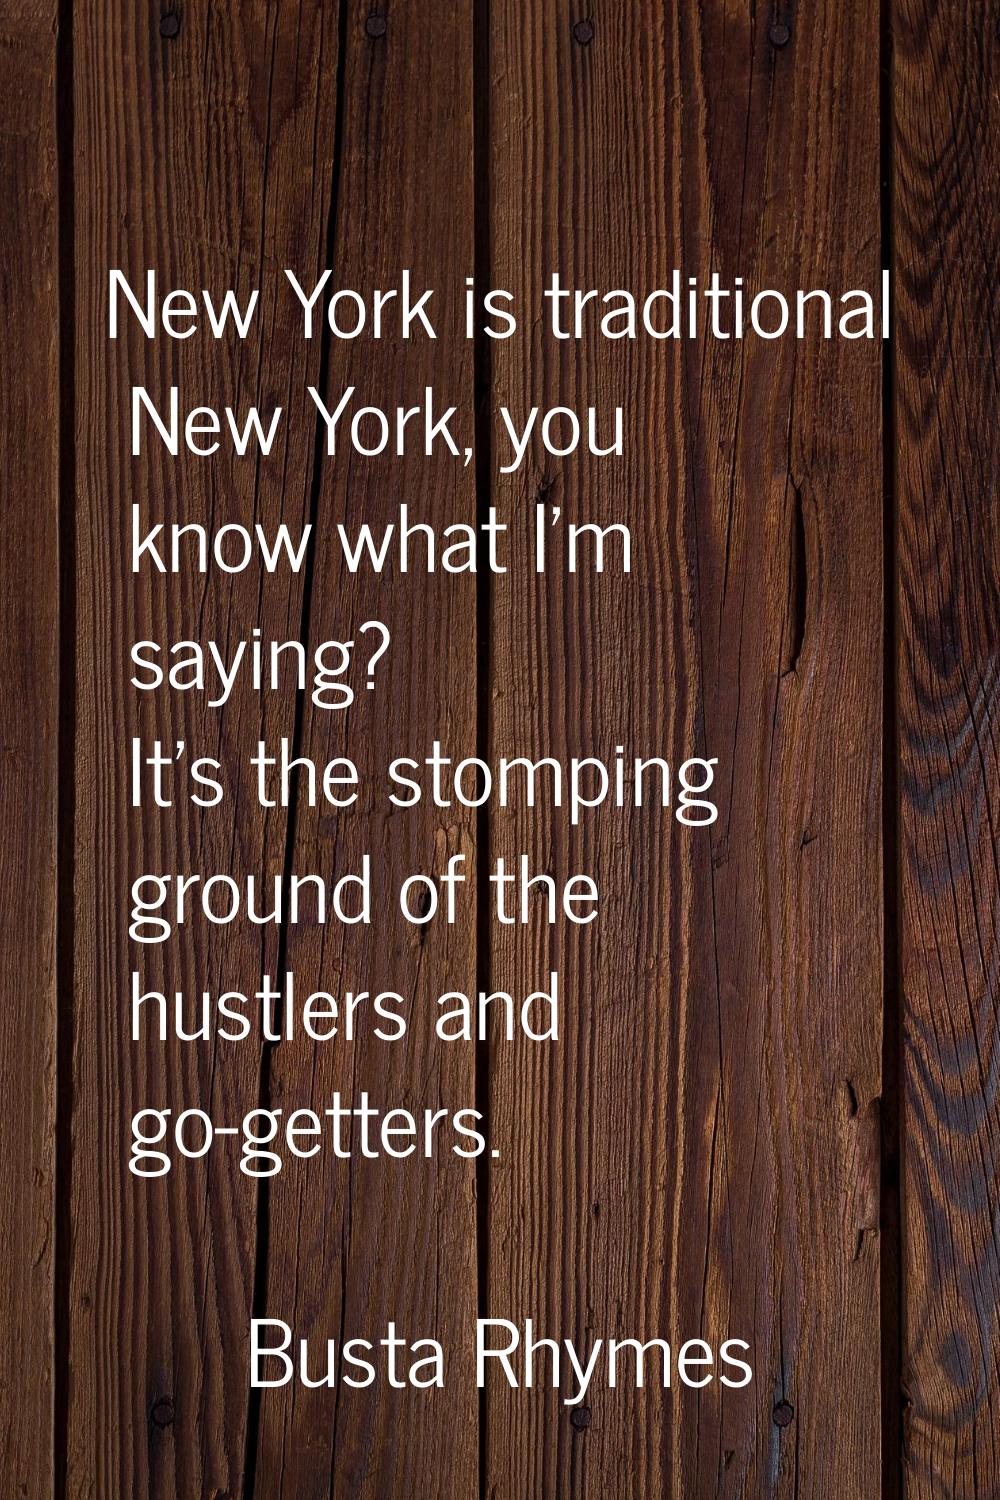 New York is traditional New York, you know what I'm saying? It's the stomping ground of the hustler